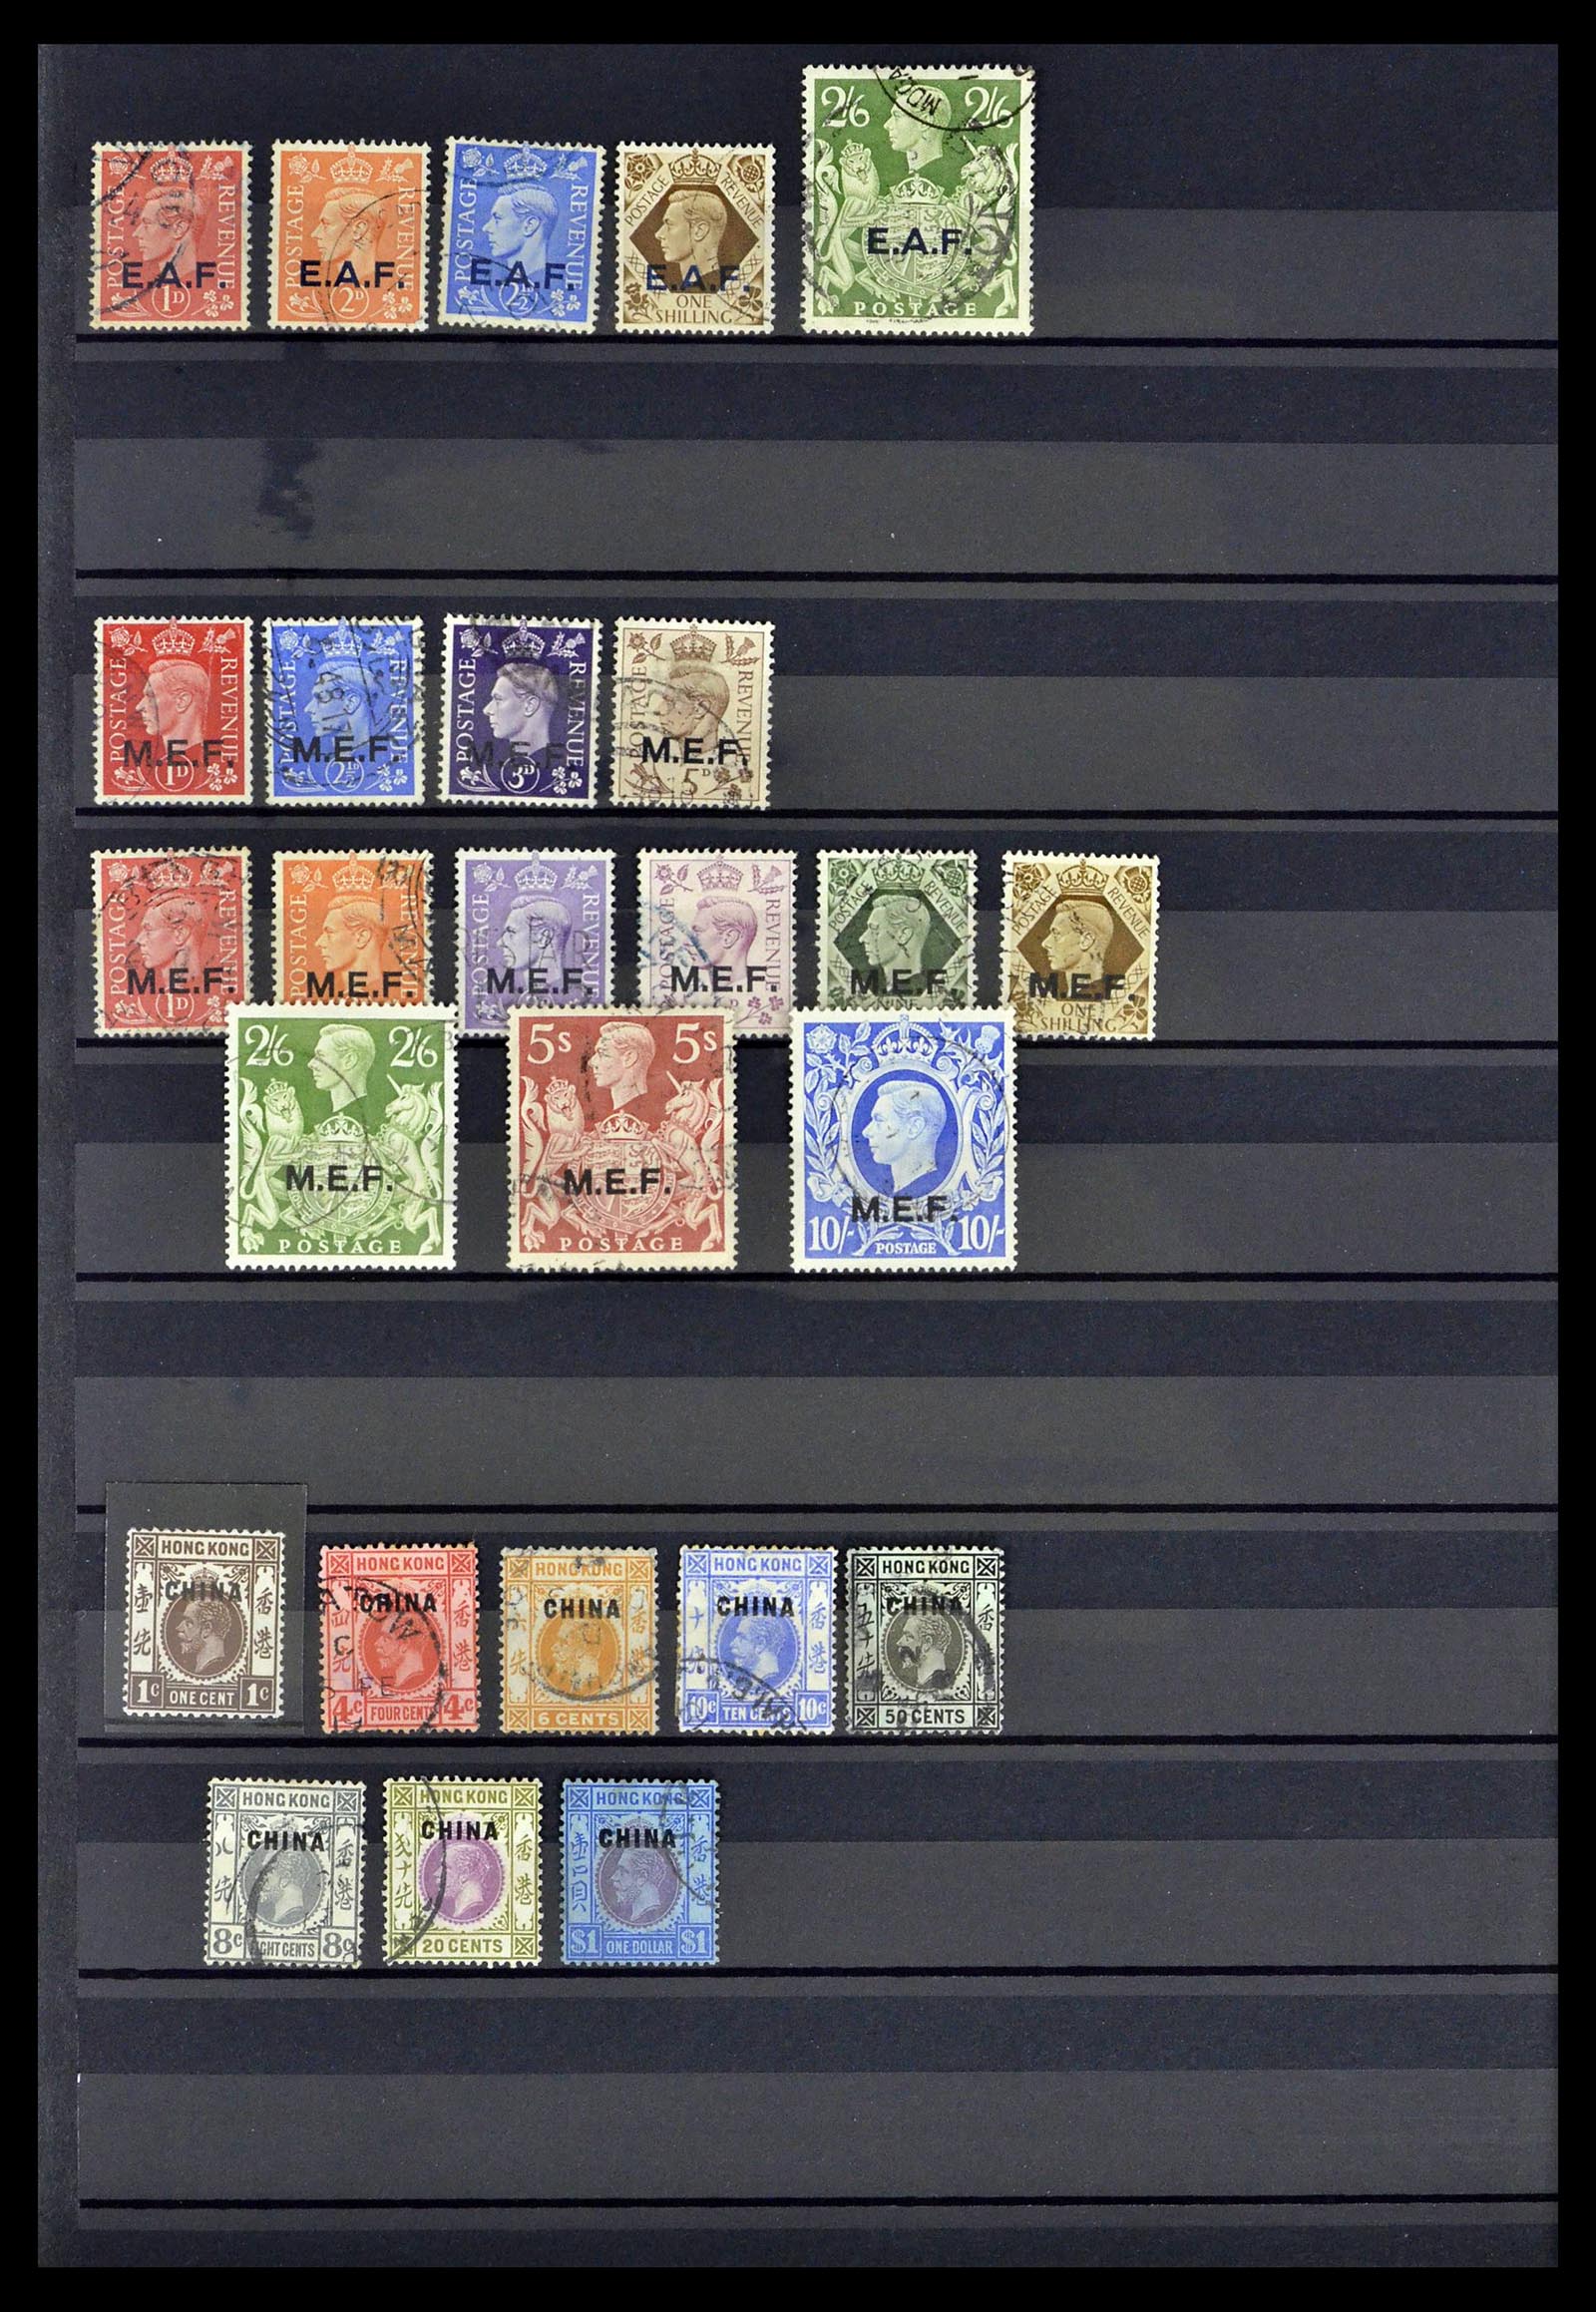 39409 0008 - Stamp collection 39409 British offices abroad 1885-1957.